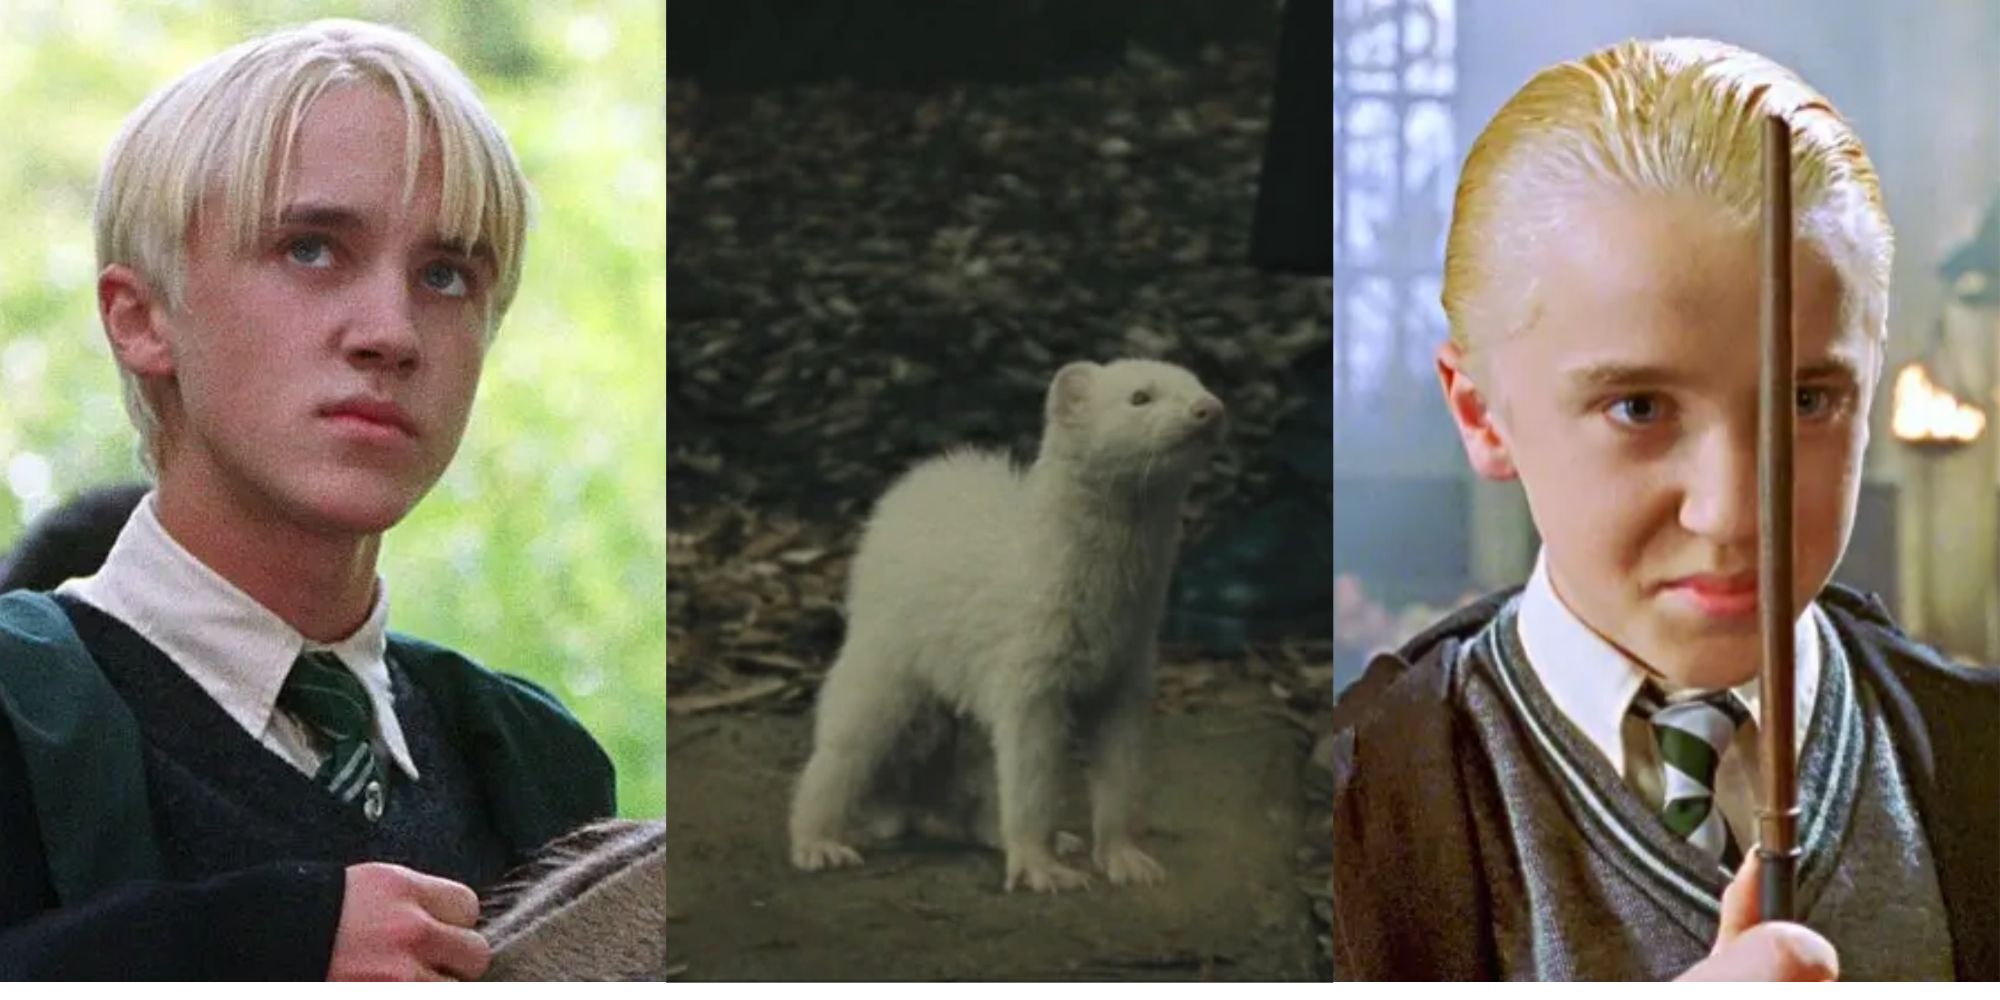 Harry Potter: 10 Memes That Sum Up Draco Malfoy As A Character